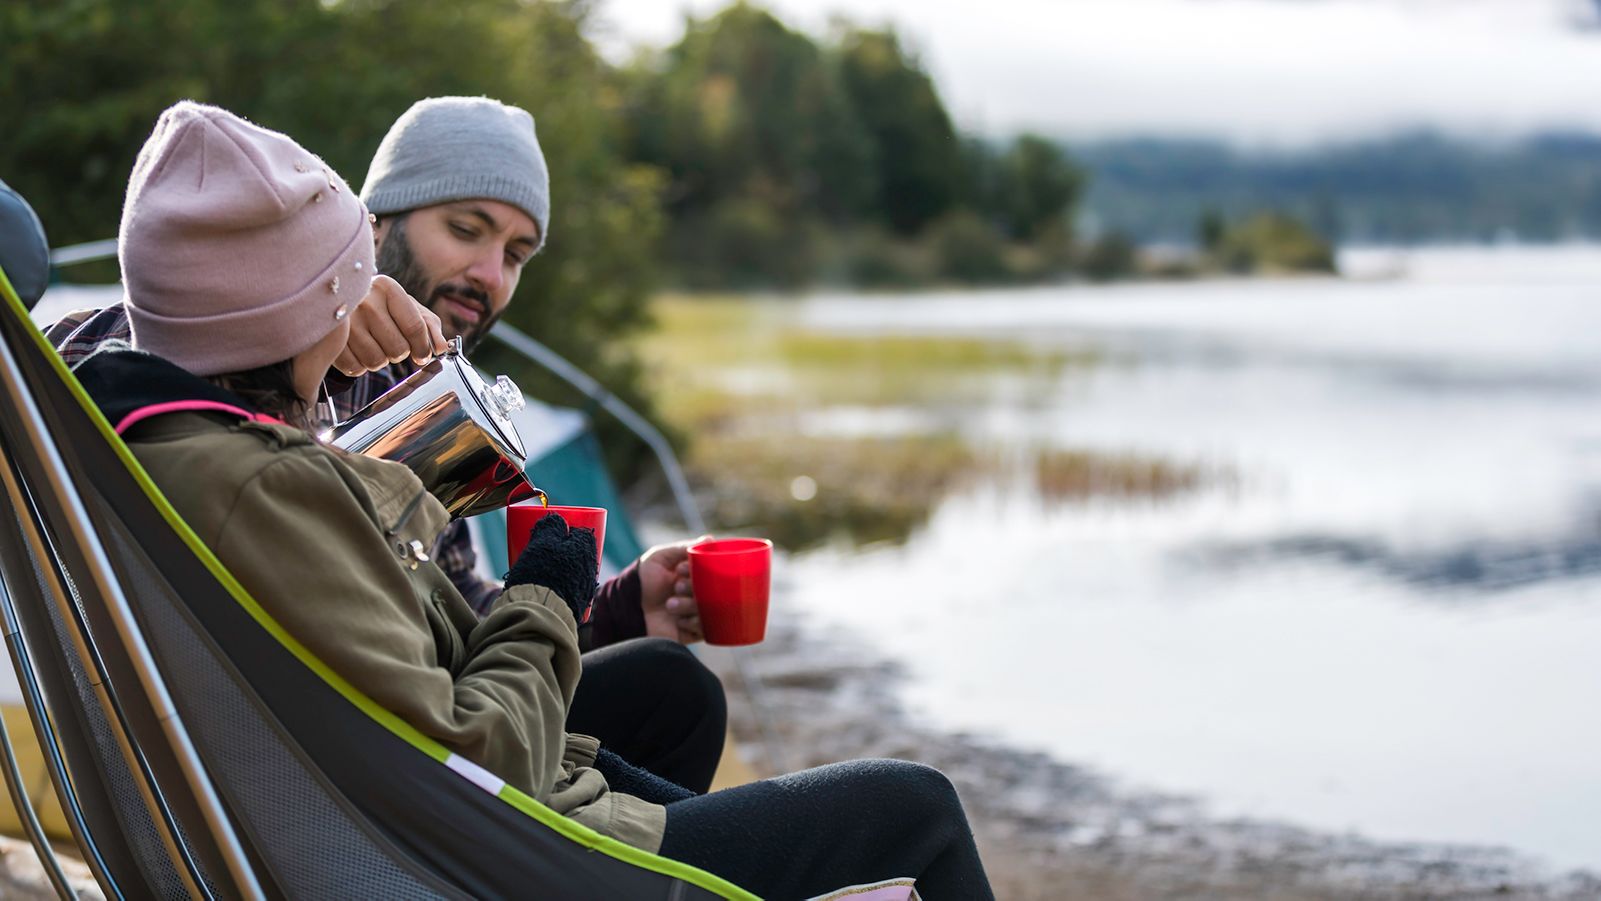 33 cold-weather camping tips to stay warm according to outdoor experts